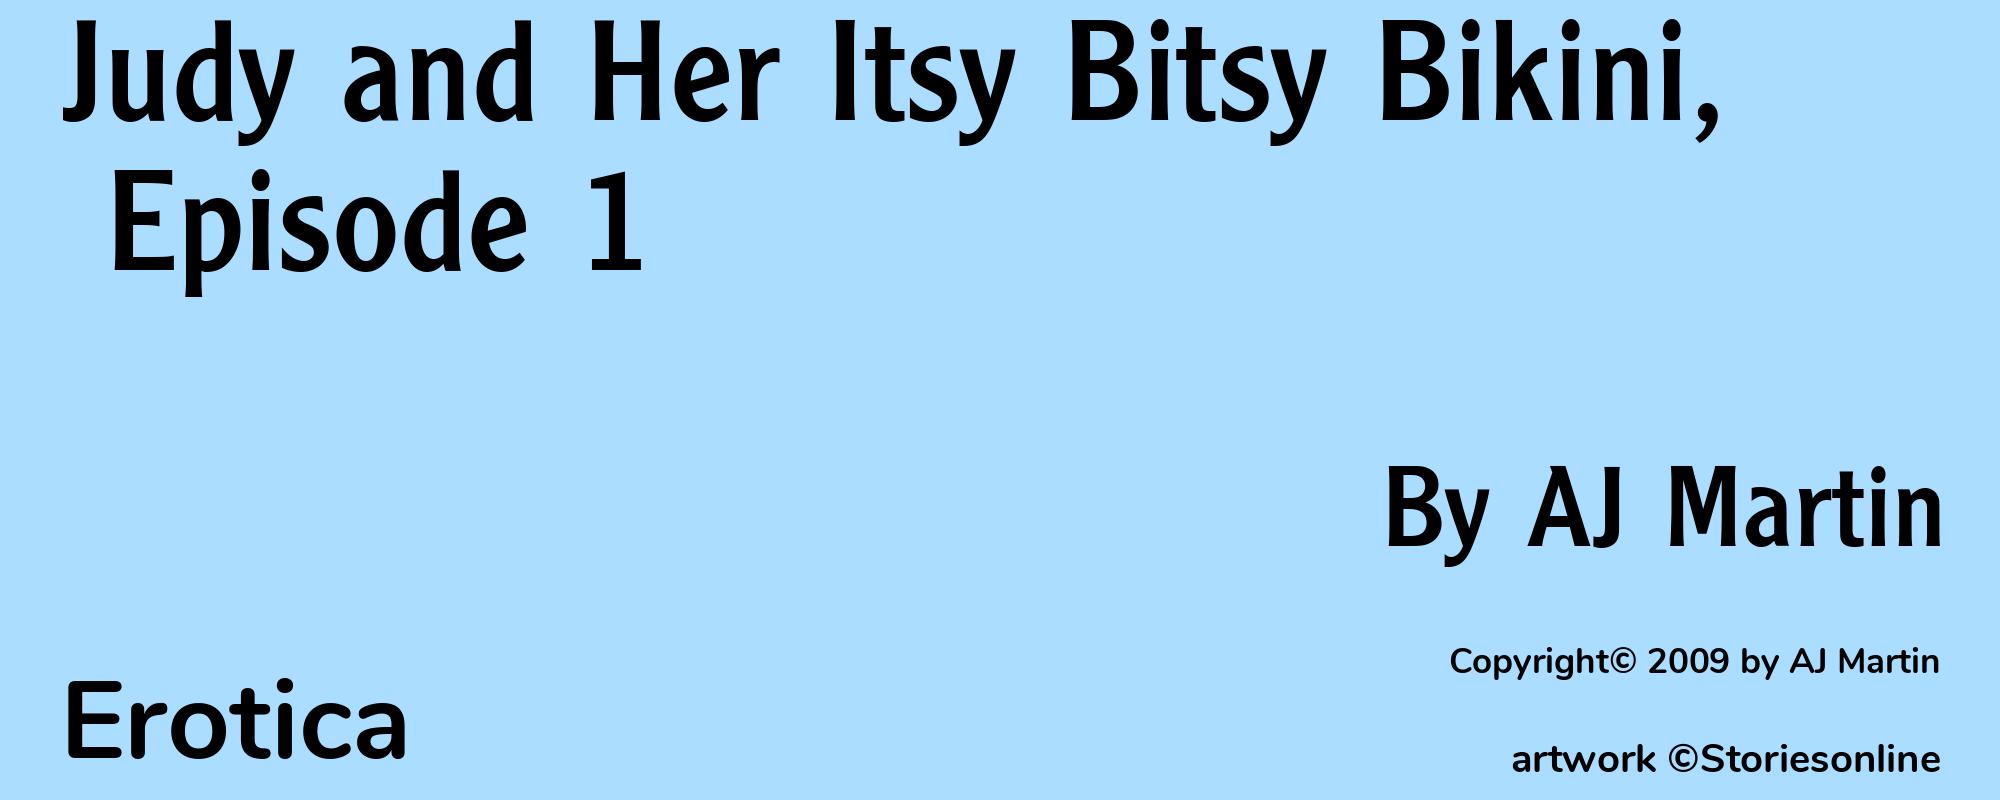 Judy and Her Itsy Bitsy Bikini, Episode 1 - Cover